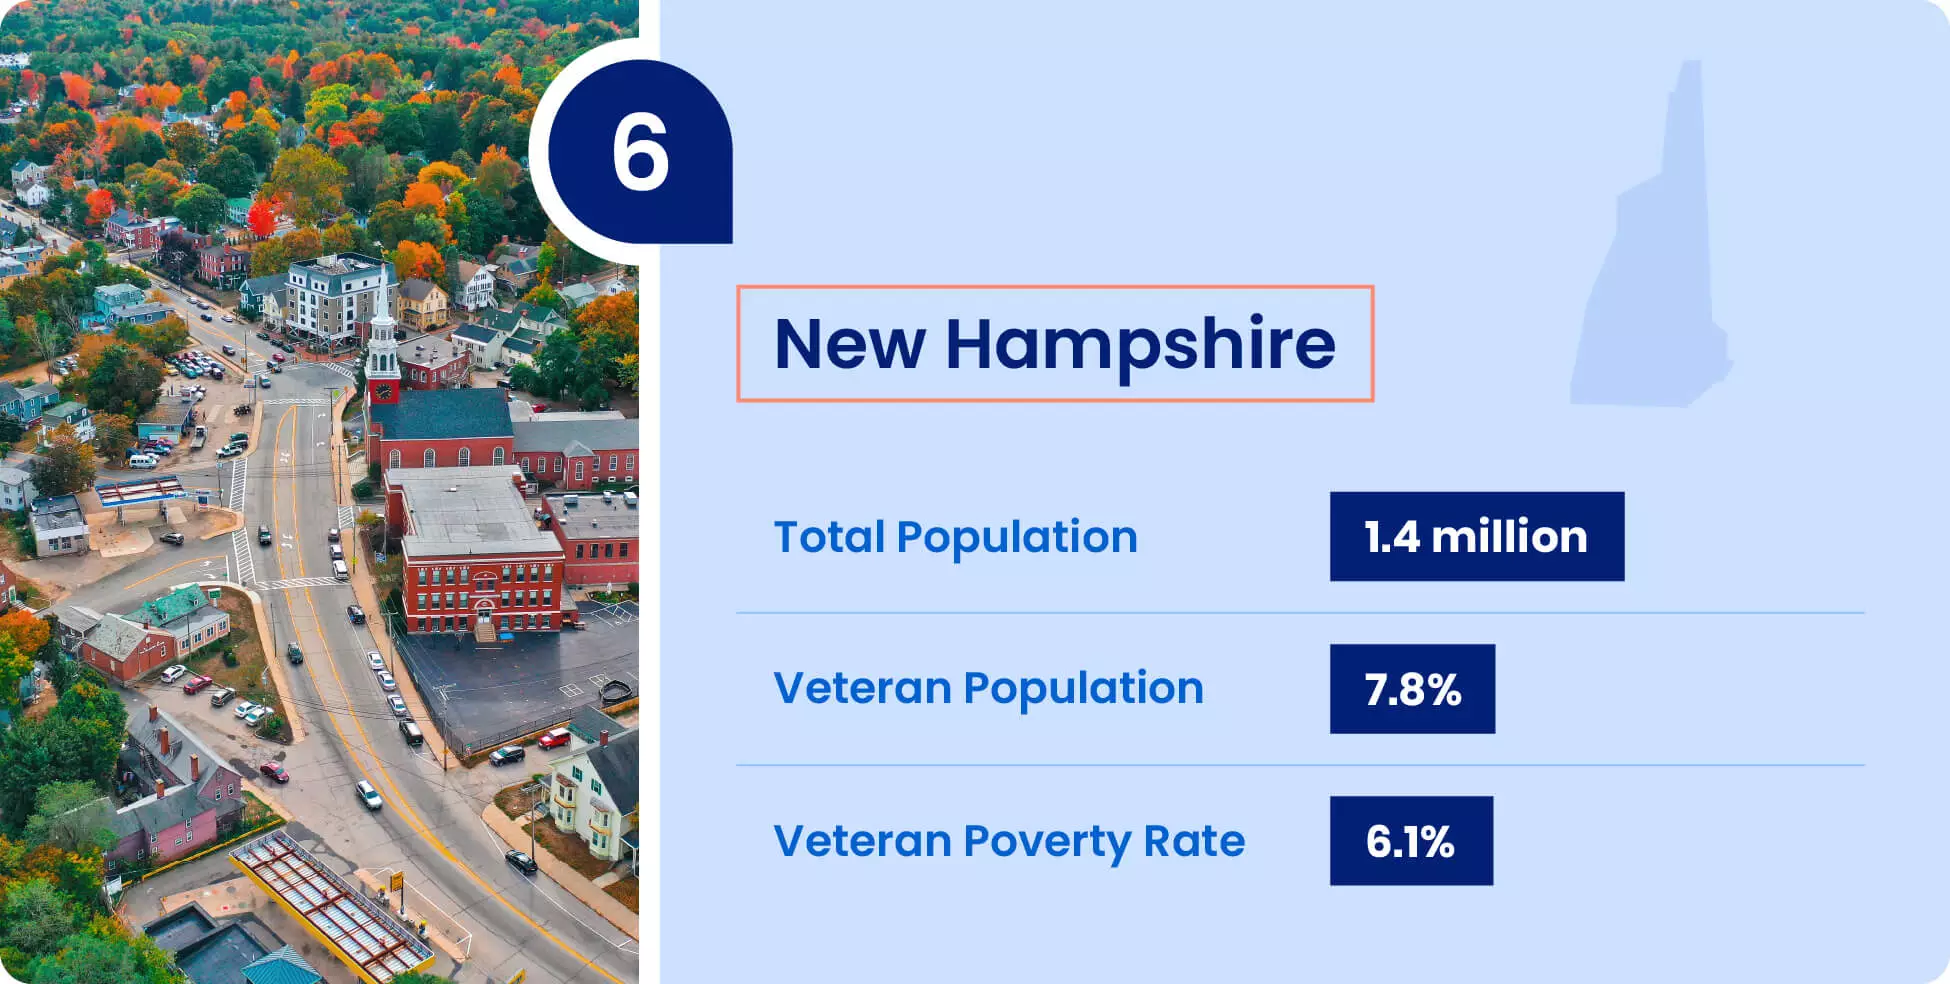 Image shows key information for military retirees thinking of moving to New Hampshire.